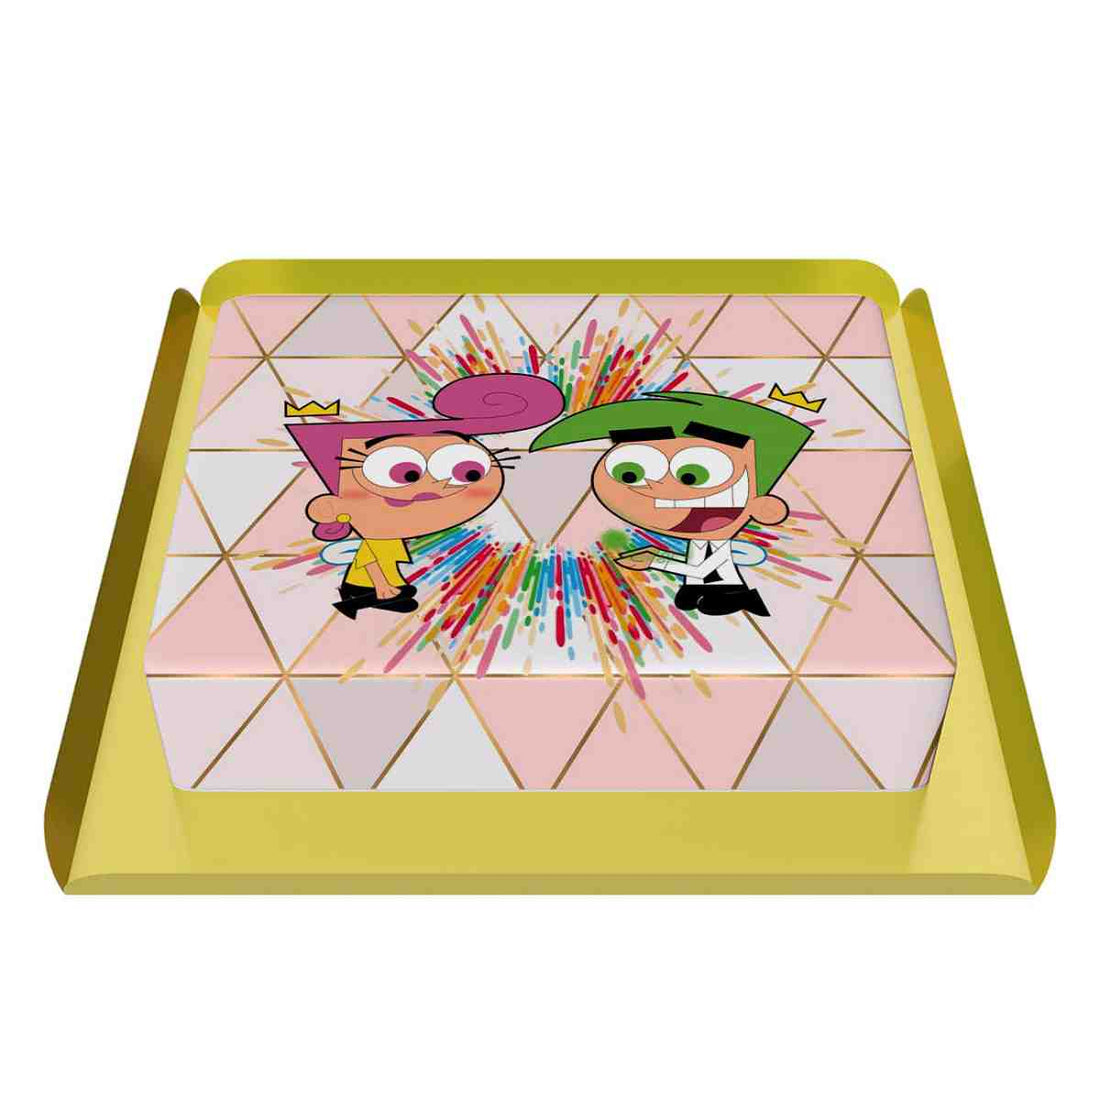 The Fairly OddParents Cake